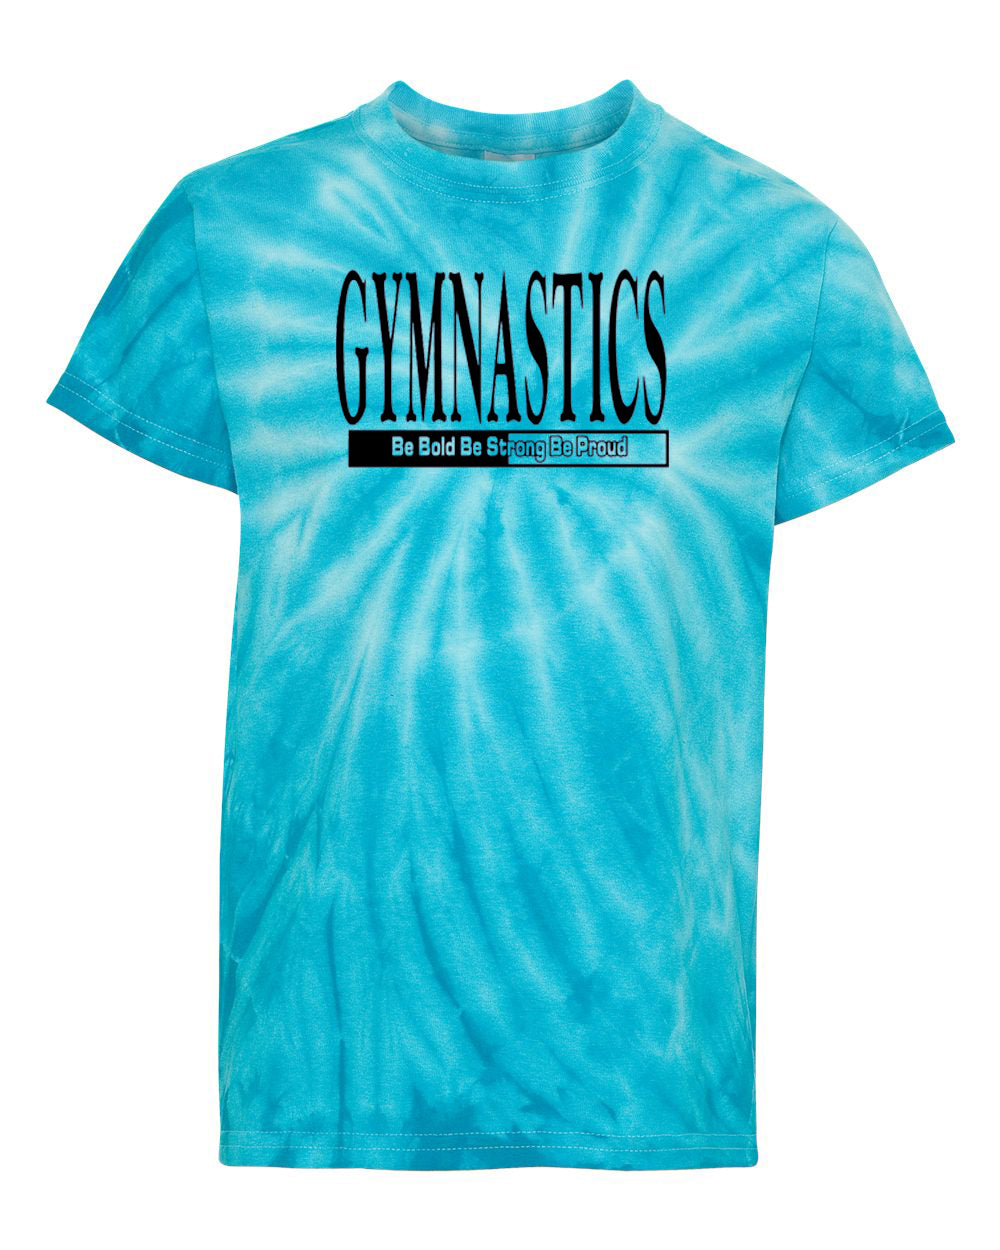 Gymnastics Be Bold Be Strong Be Proud Youth Tie Dye T-Shirt Turquoise